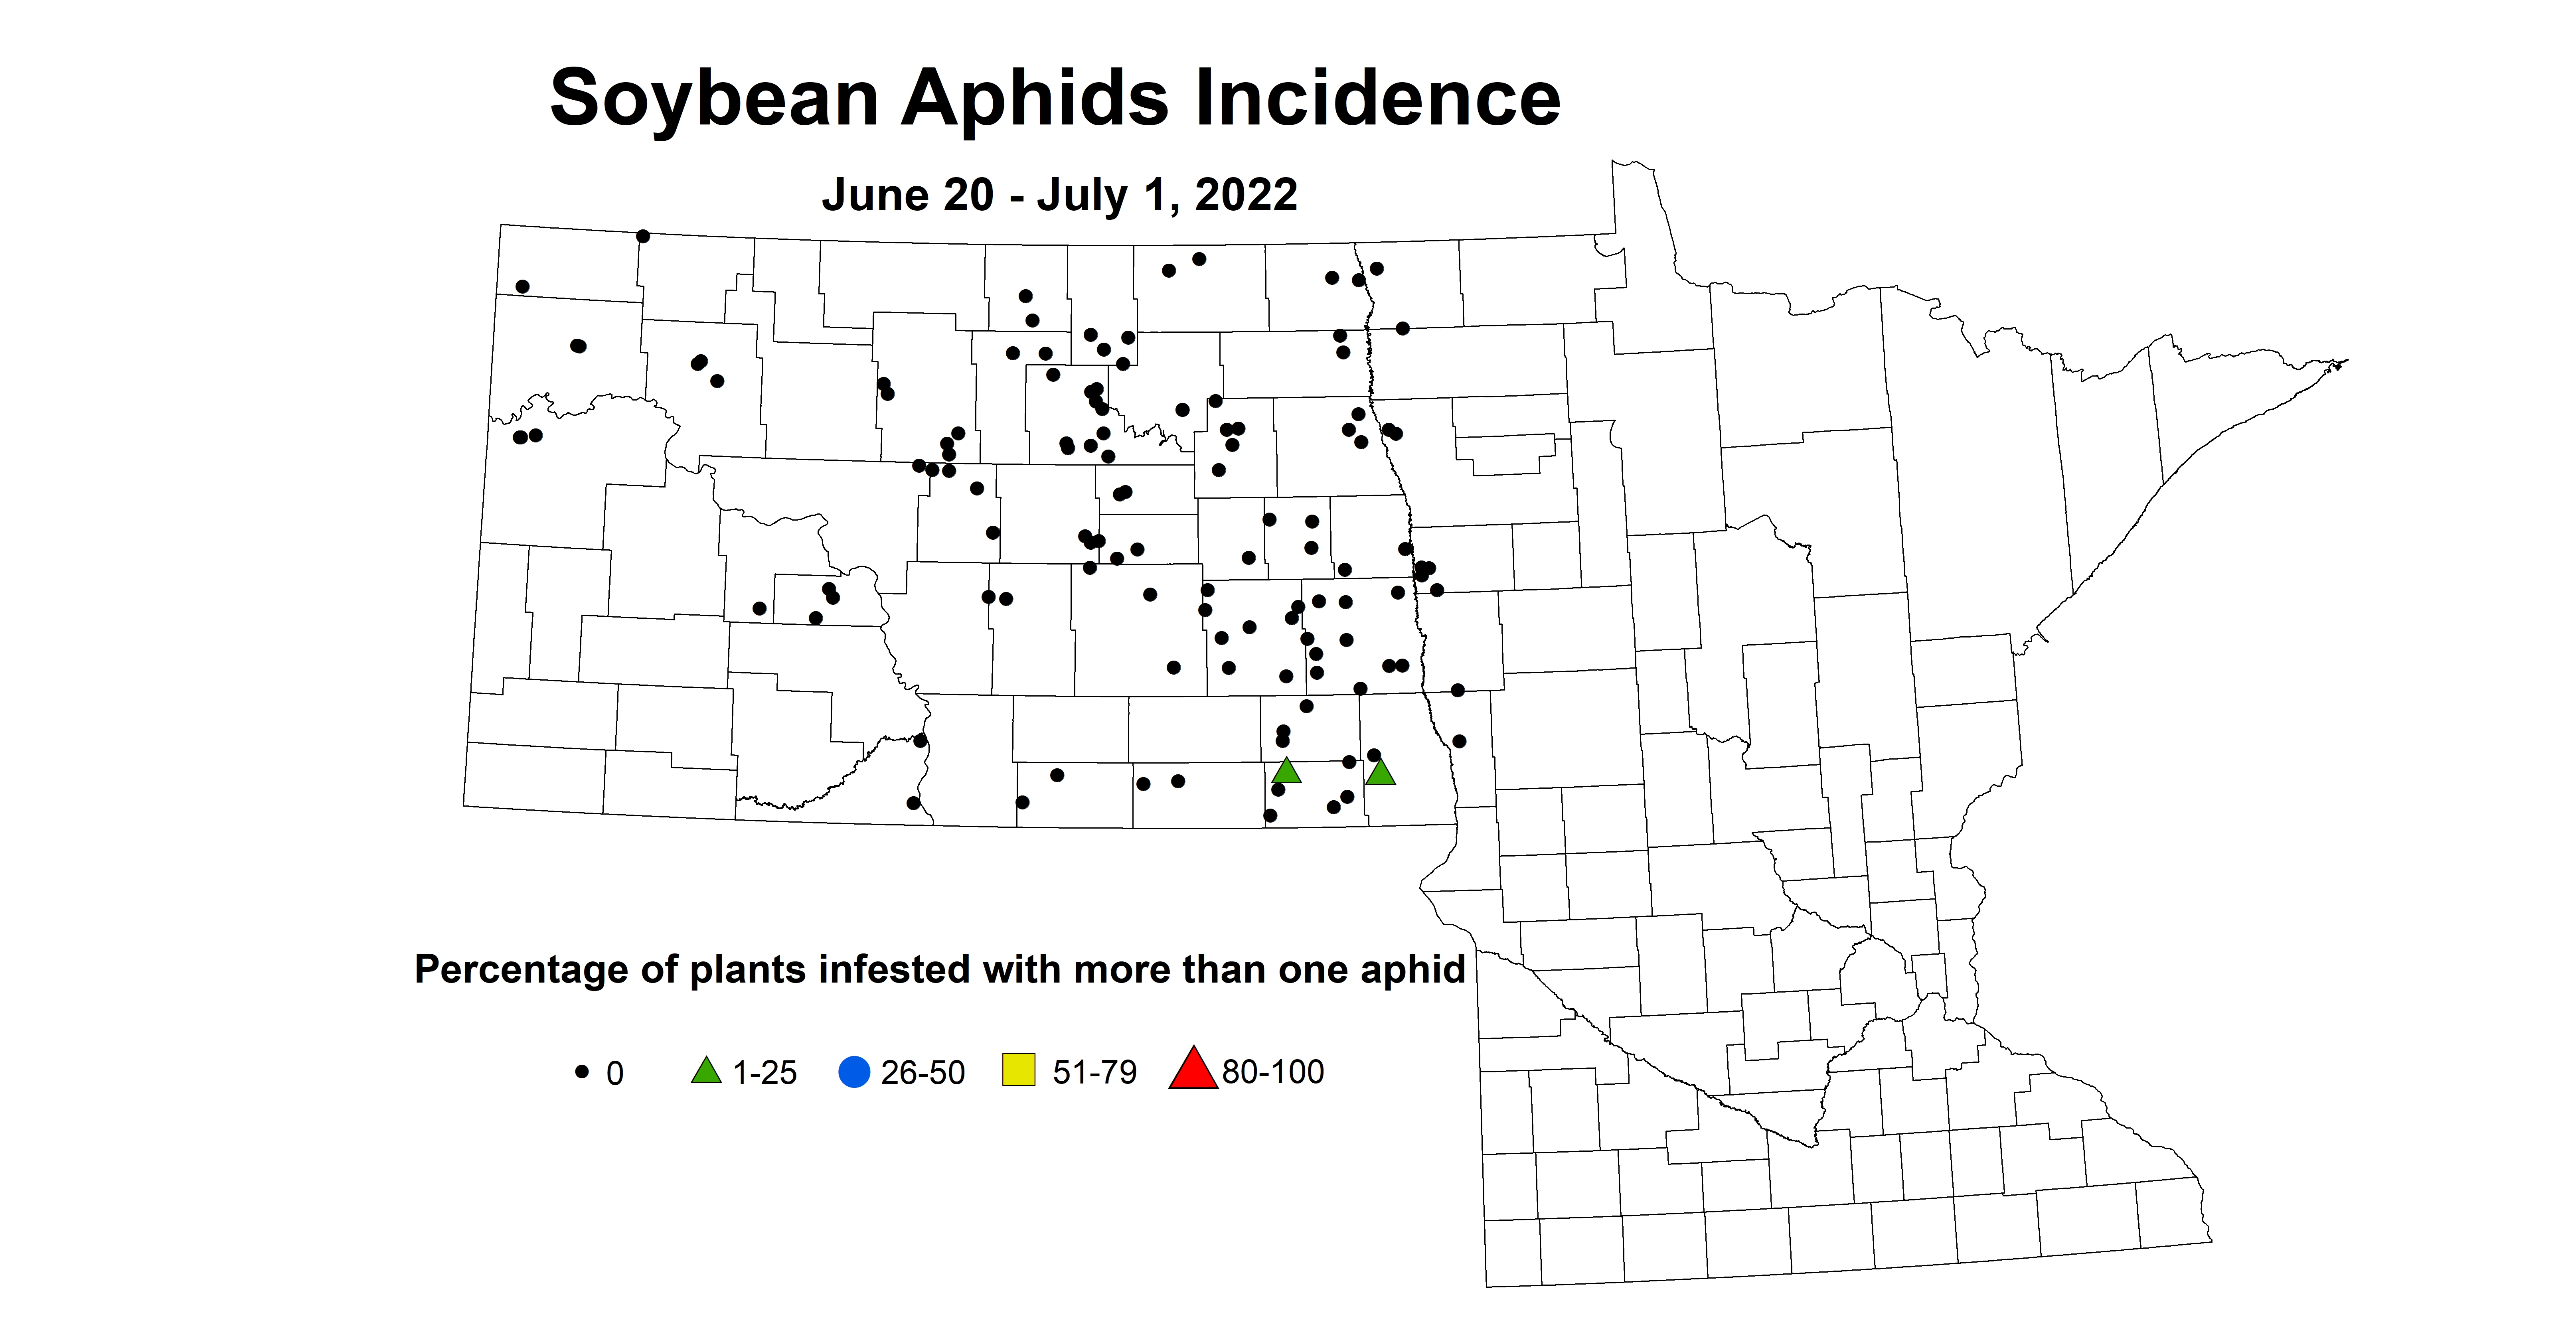 ND IPM map of soybean aphid incidence June 20 - July 1 2022